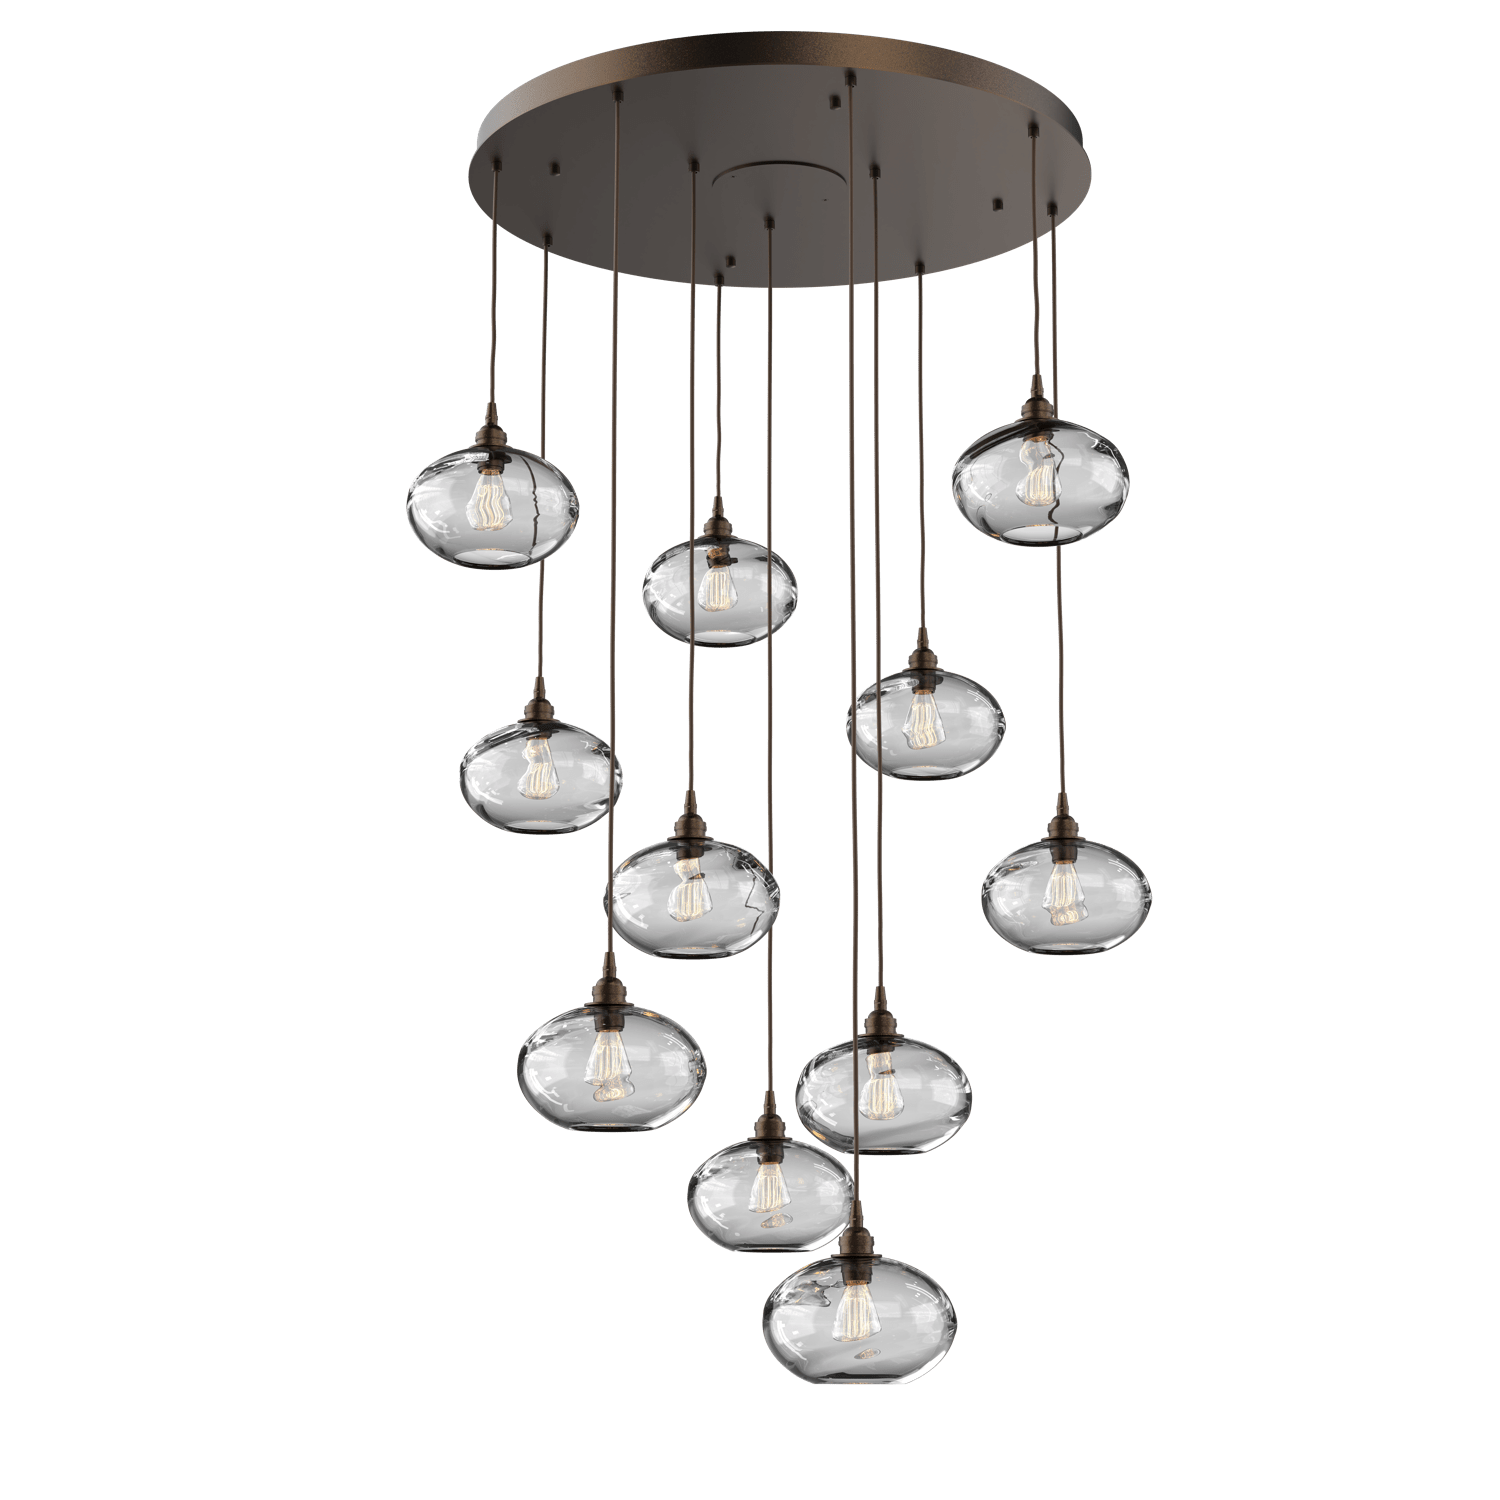 CHB0036-11-FB-OC-Hammerton-Studio-Optic-Blown-Glass-Coppa-11-light-round-pendant-chandelier-with-flat-bronze-finish-and-optic-clear-blown-glass-shades-and-incandescent-lamping